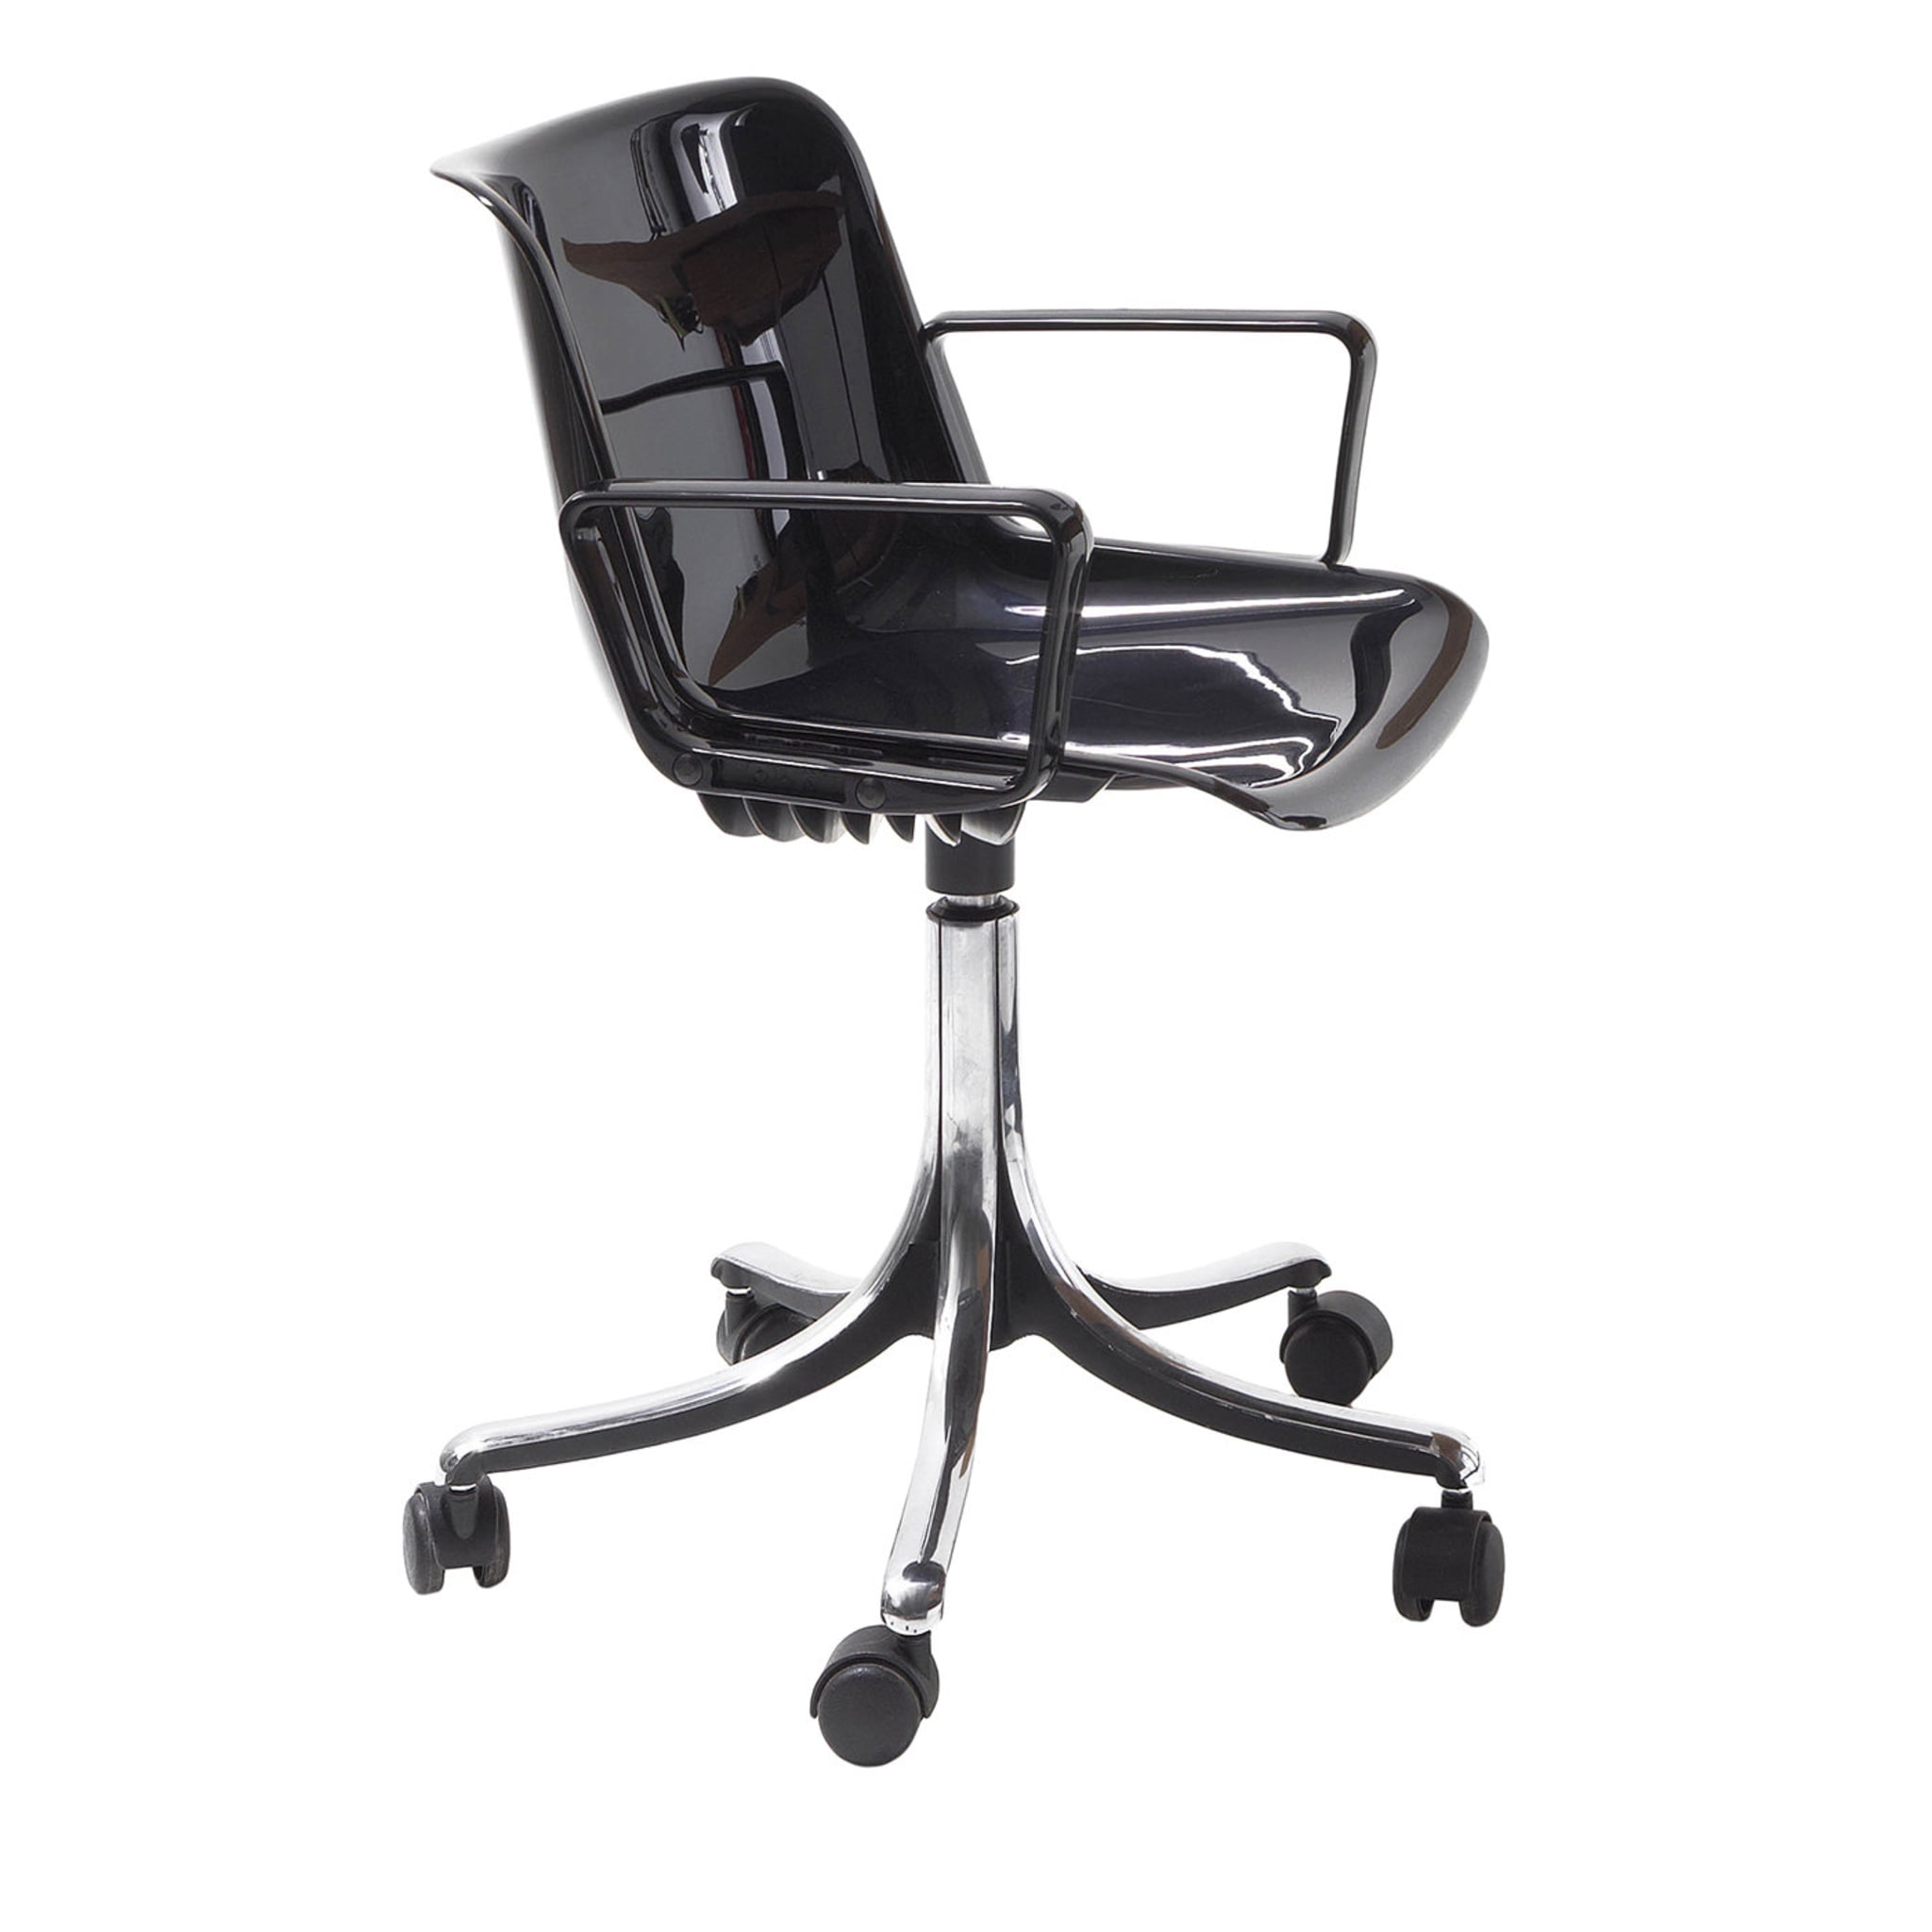 Modus Black Caster Chair with Armrests by Centro Progetti Tecno - Main view